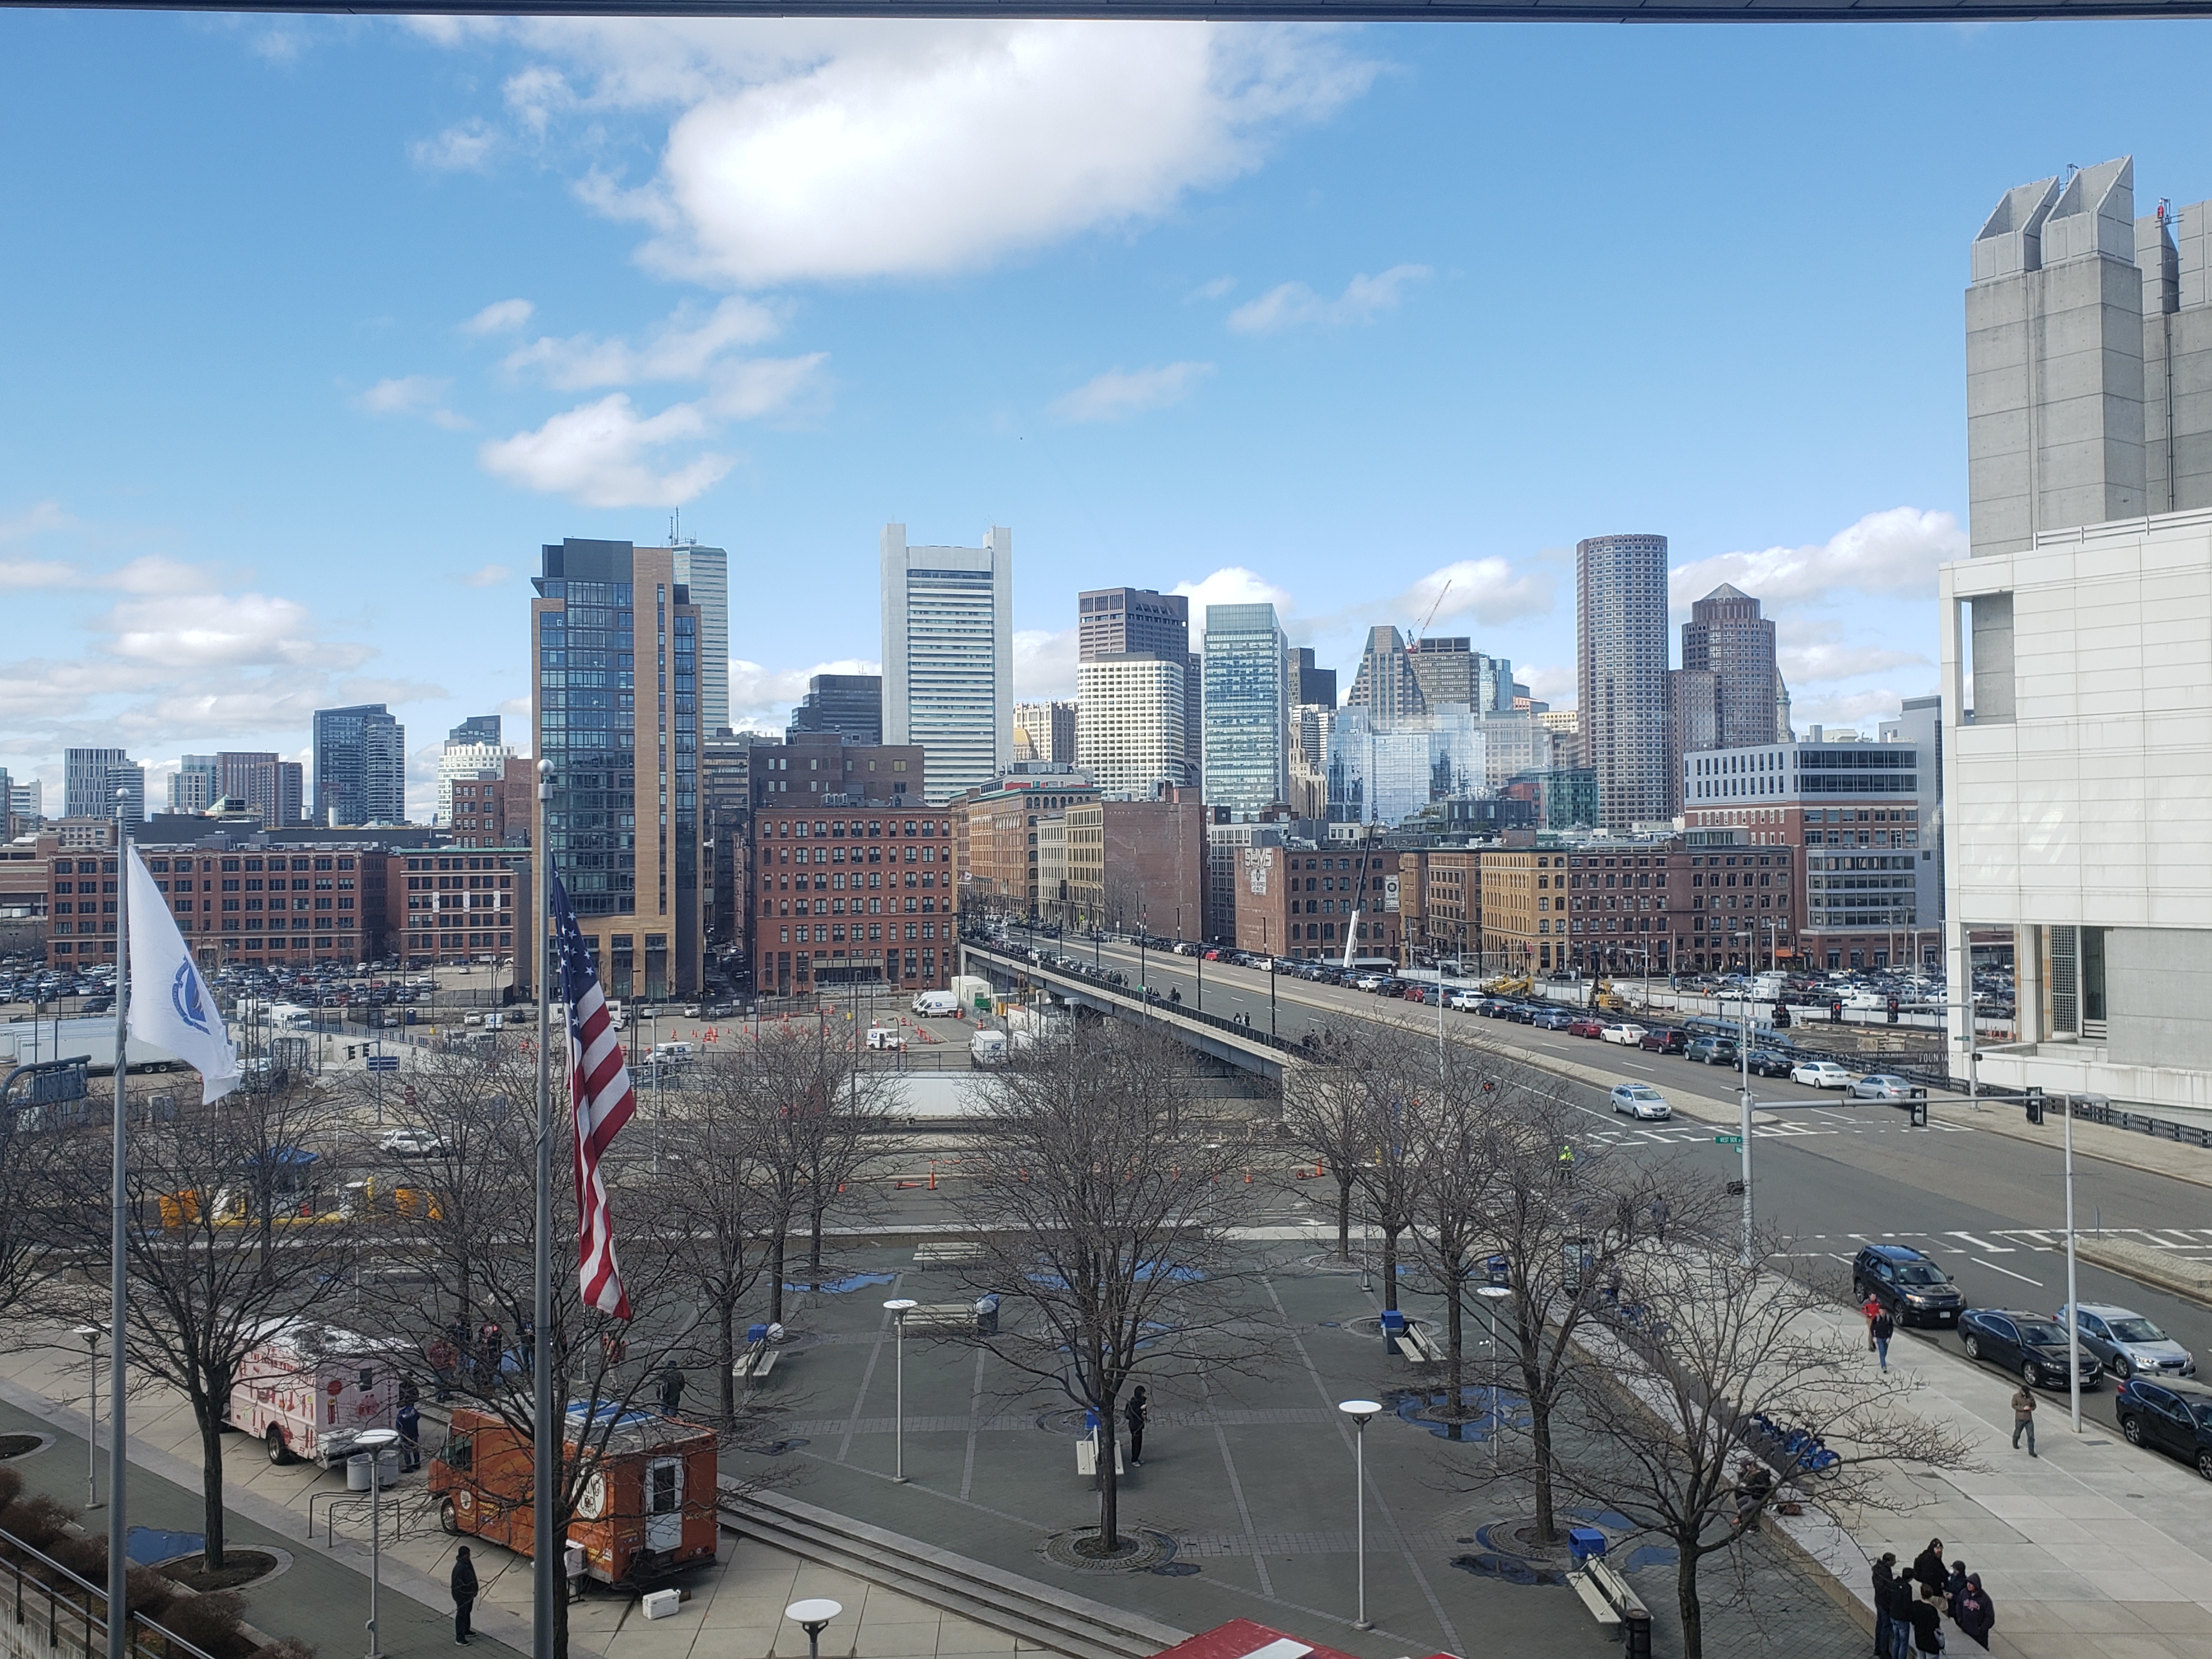 A View of Boston from PAX.